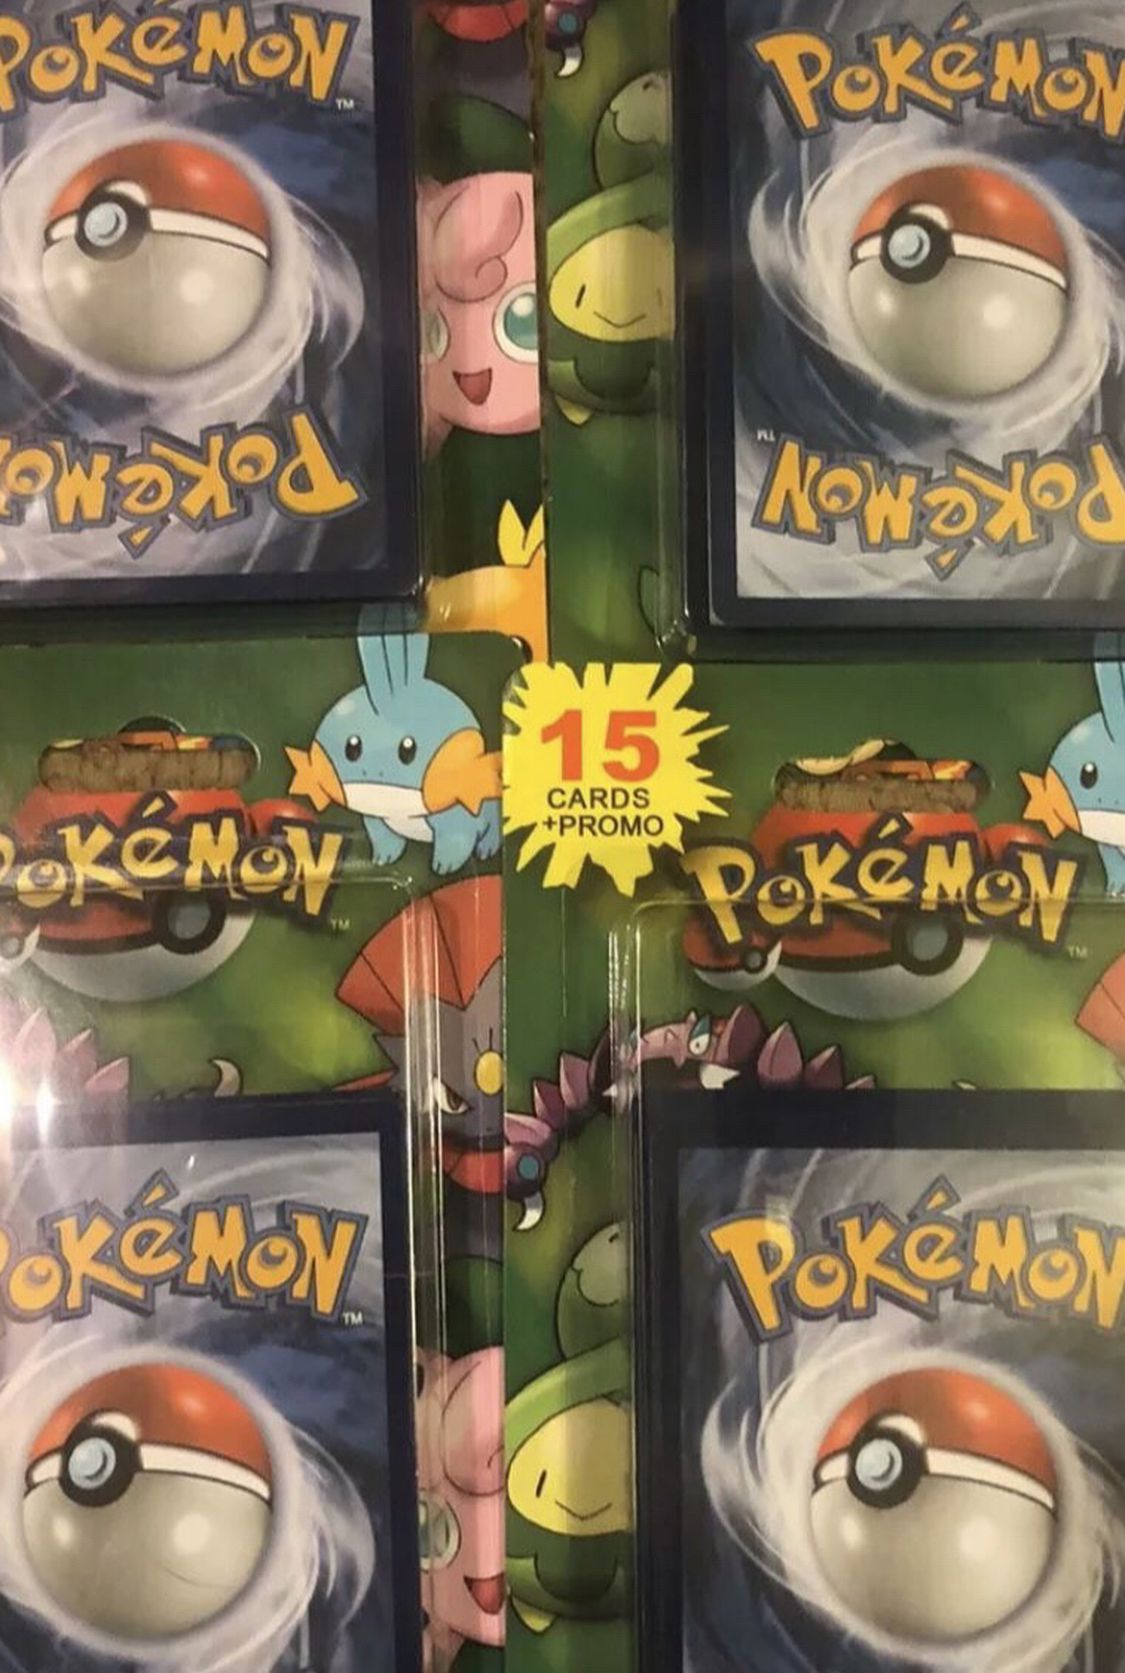 Pokemon 15 Card + Promo- Pack - Possible Holo, Possible Charizard??? - Lot of 4 - Factory sealed